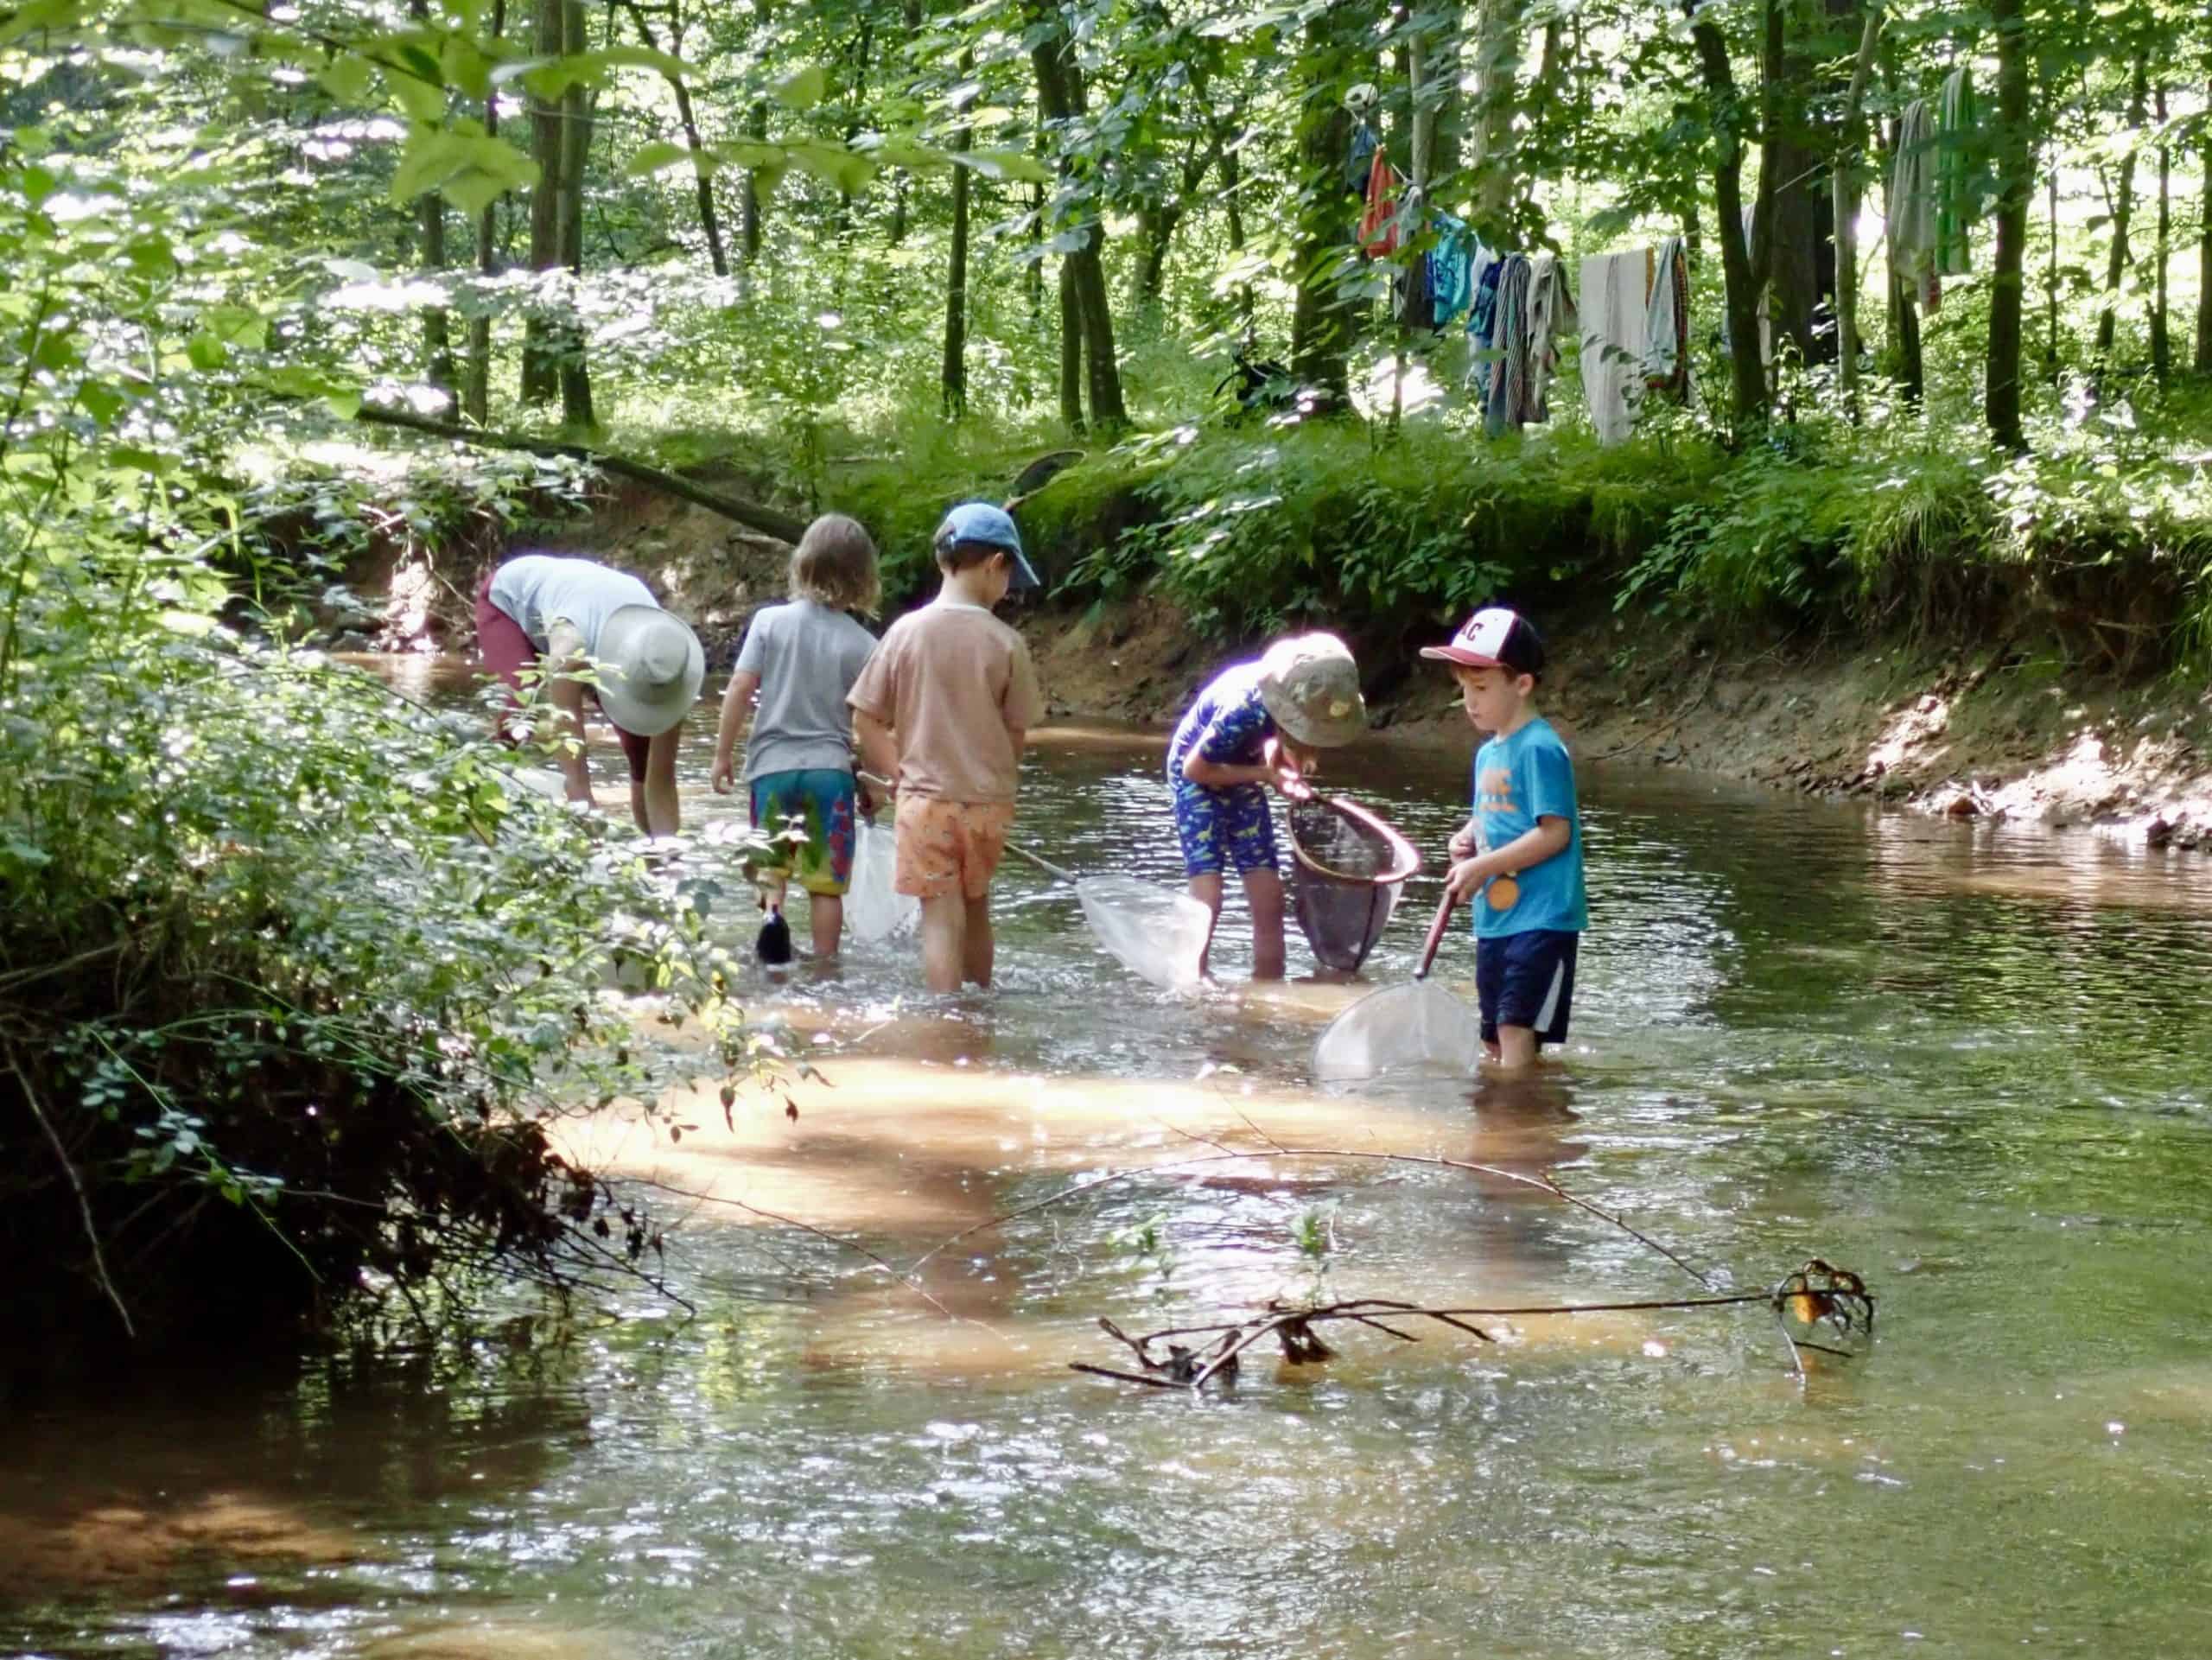 Kids playing in a stream